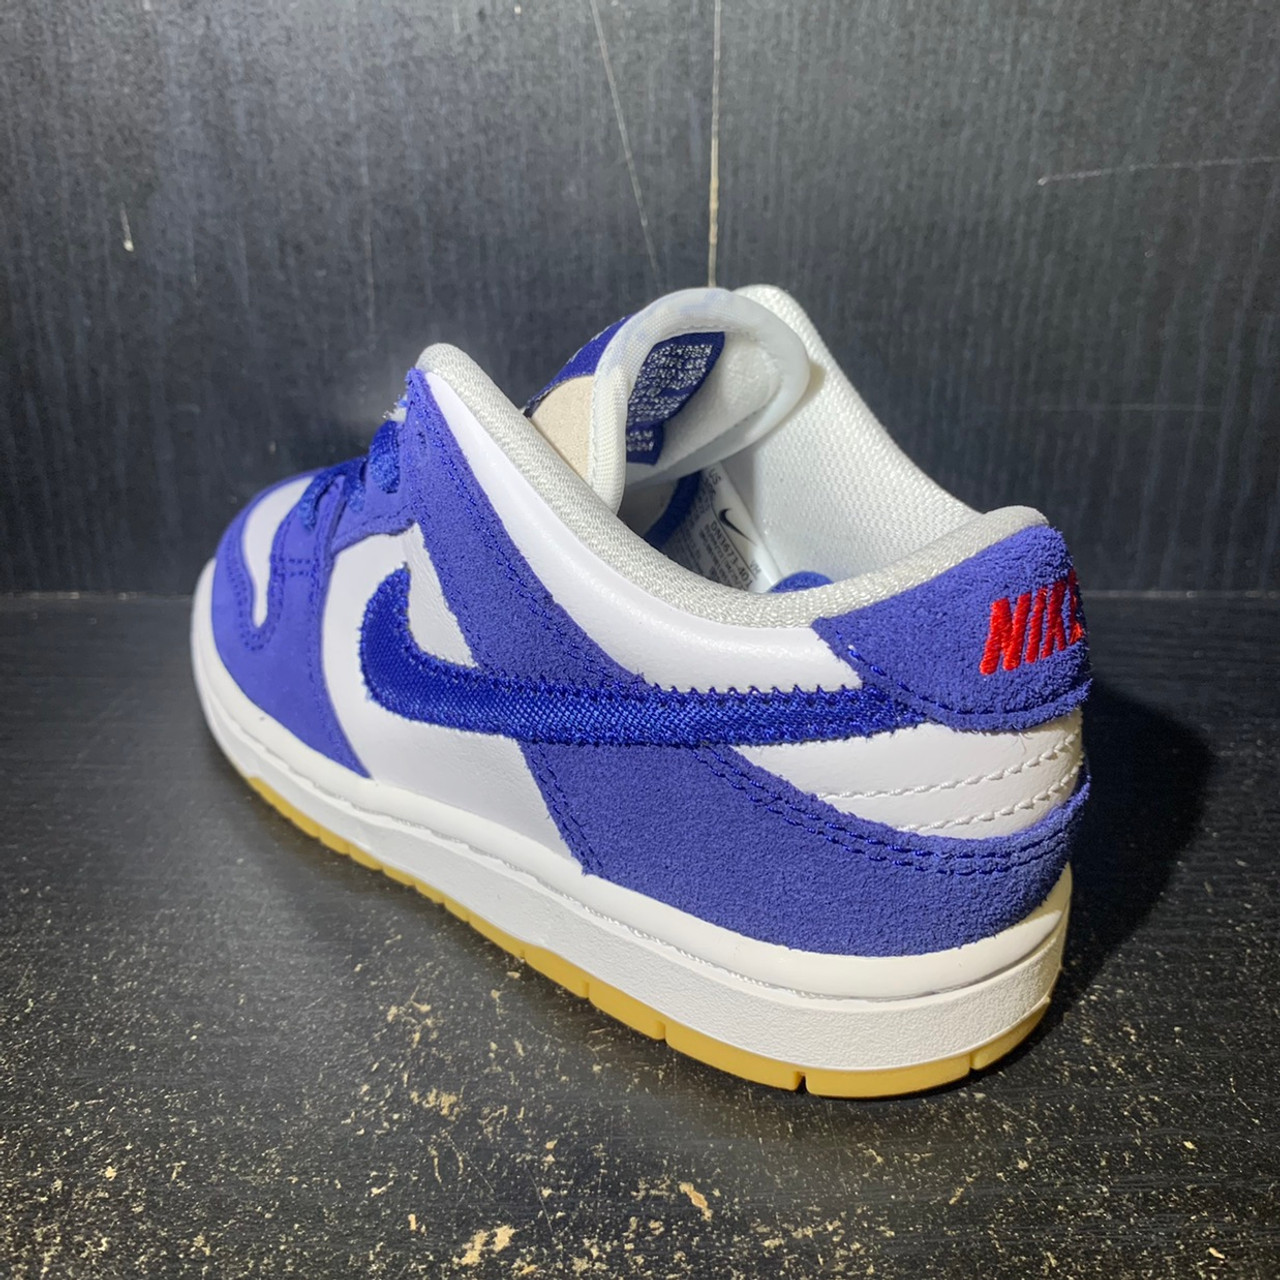 Nike SB Dodger Dunk for Sale in San Diego, CA - OfferUp